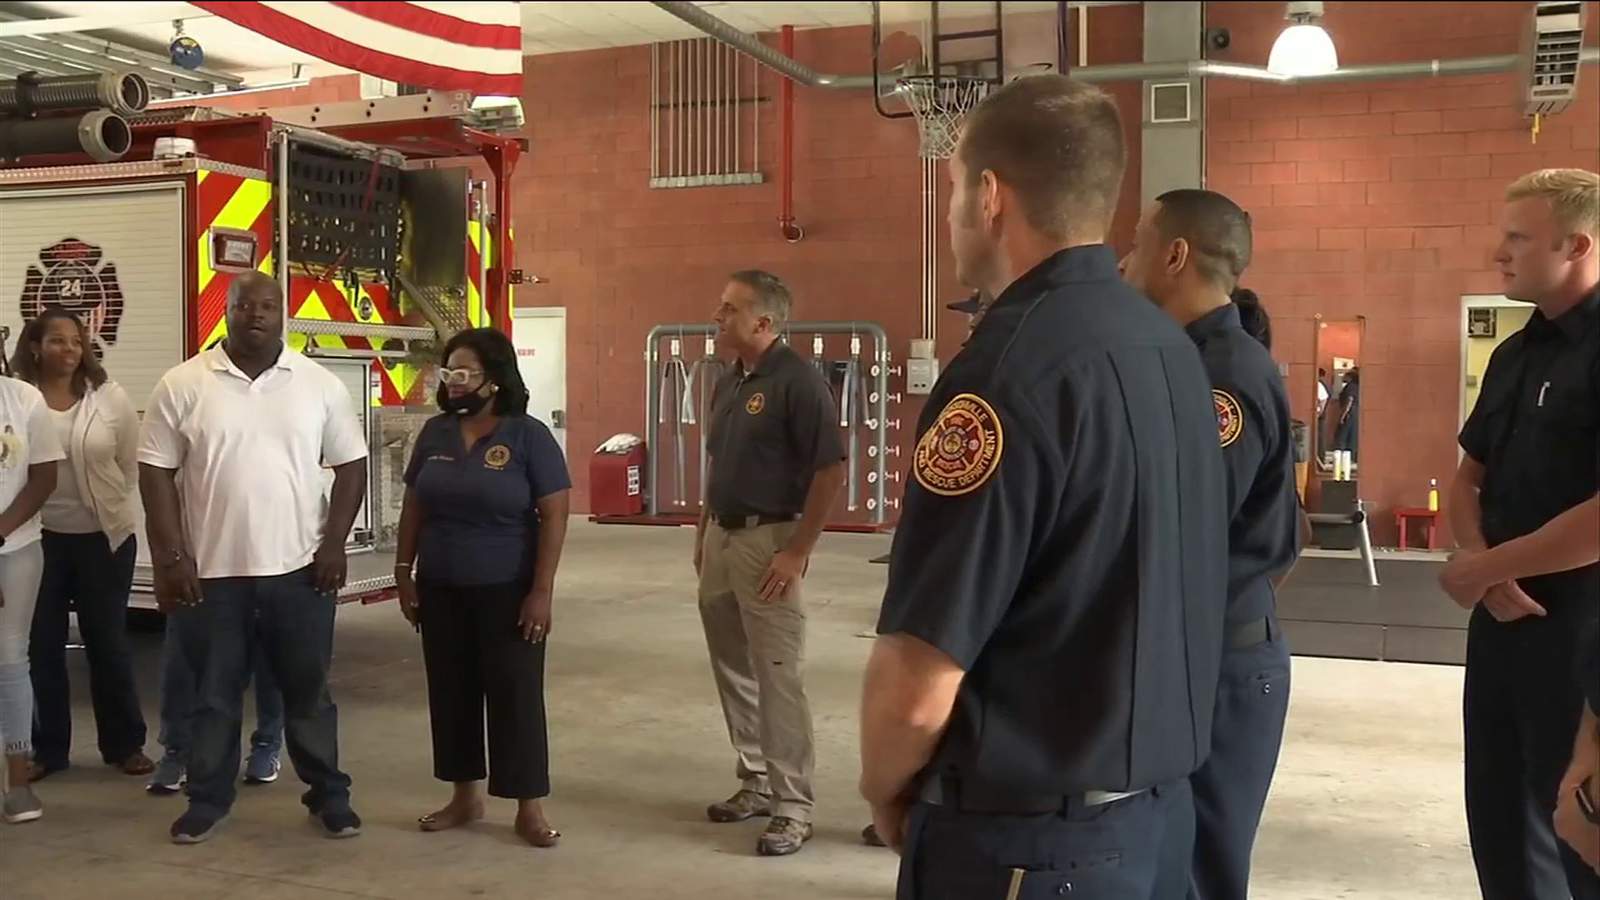 Local first responders honored by JuCoby Pittman, other community leaders